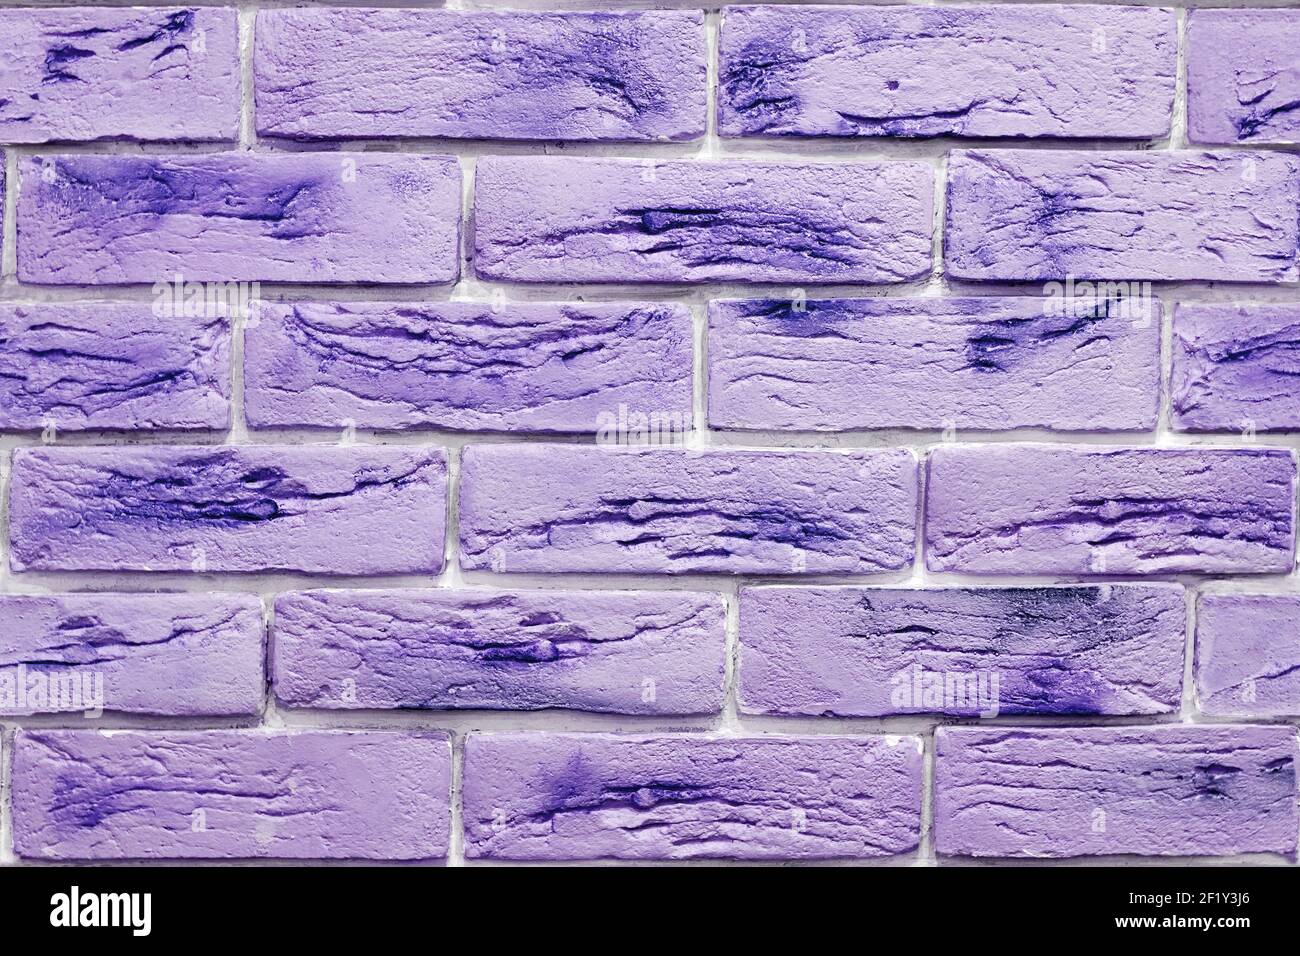 Seamless background pattern of lush purple decorative bricks on the wall. Interior design and materials Stock Photo